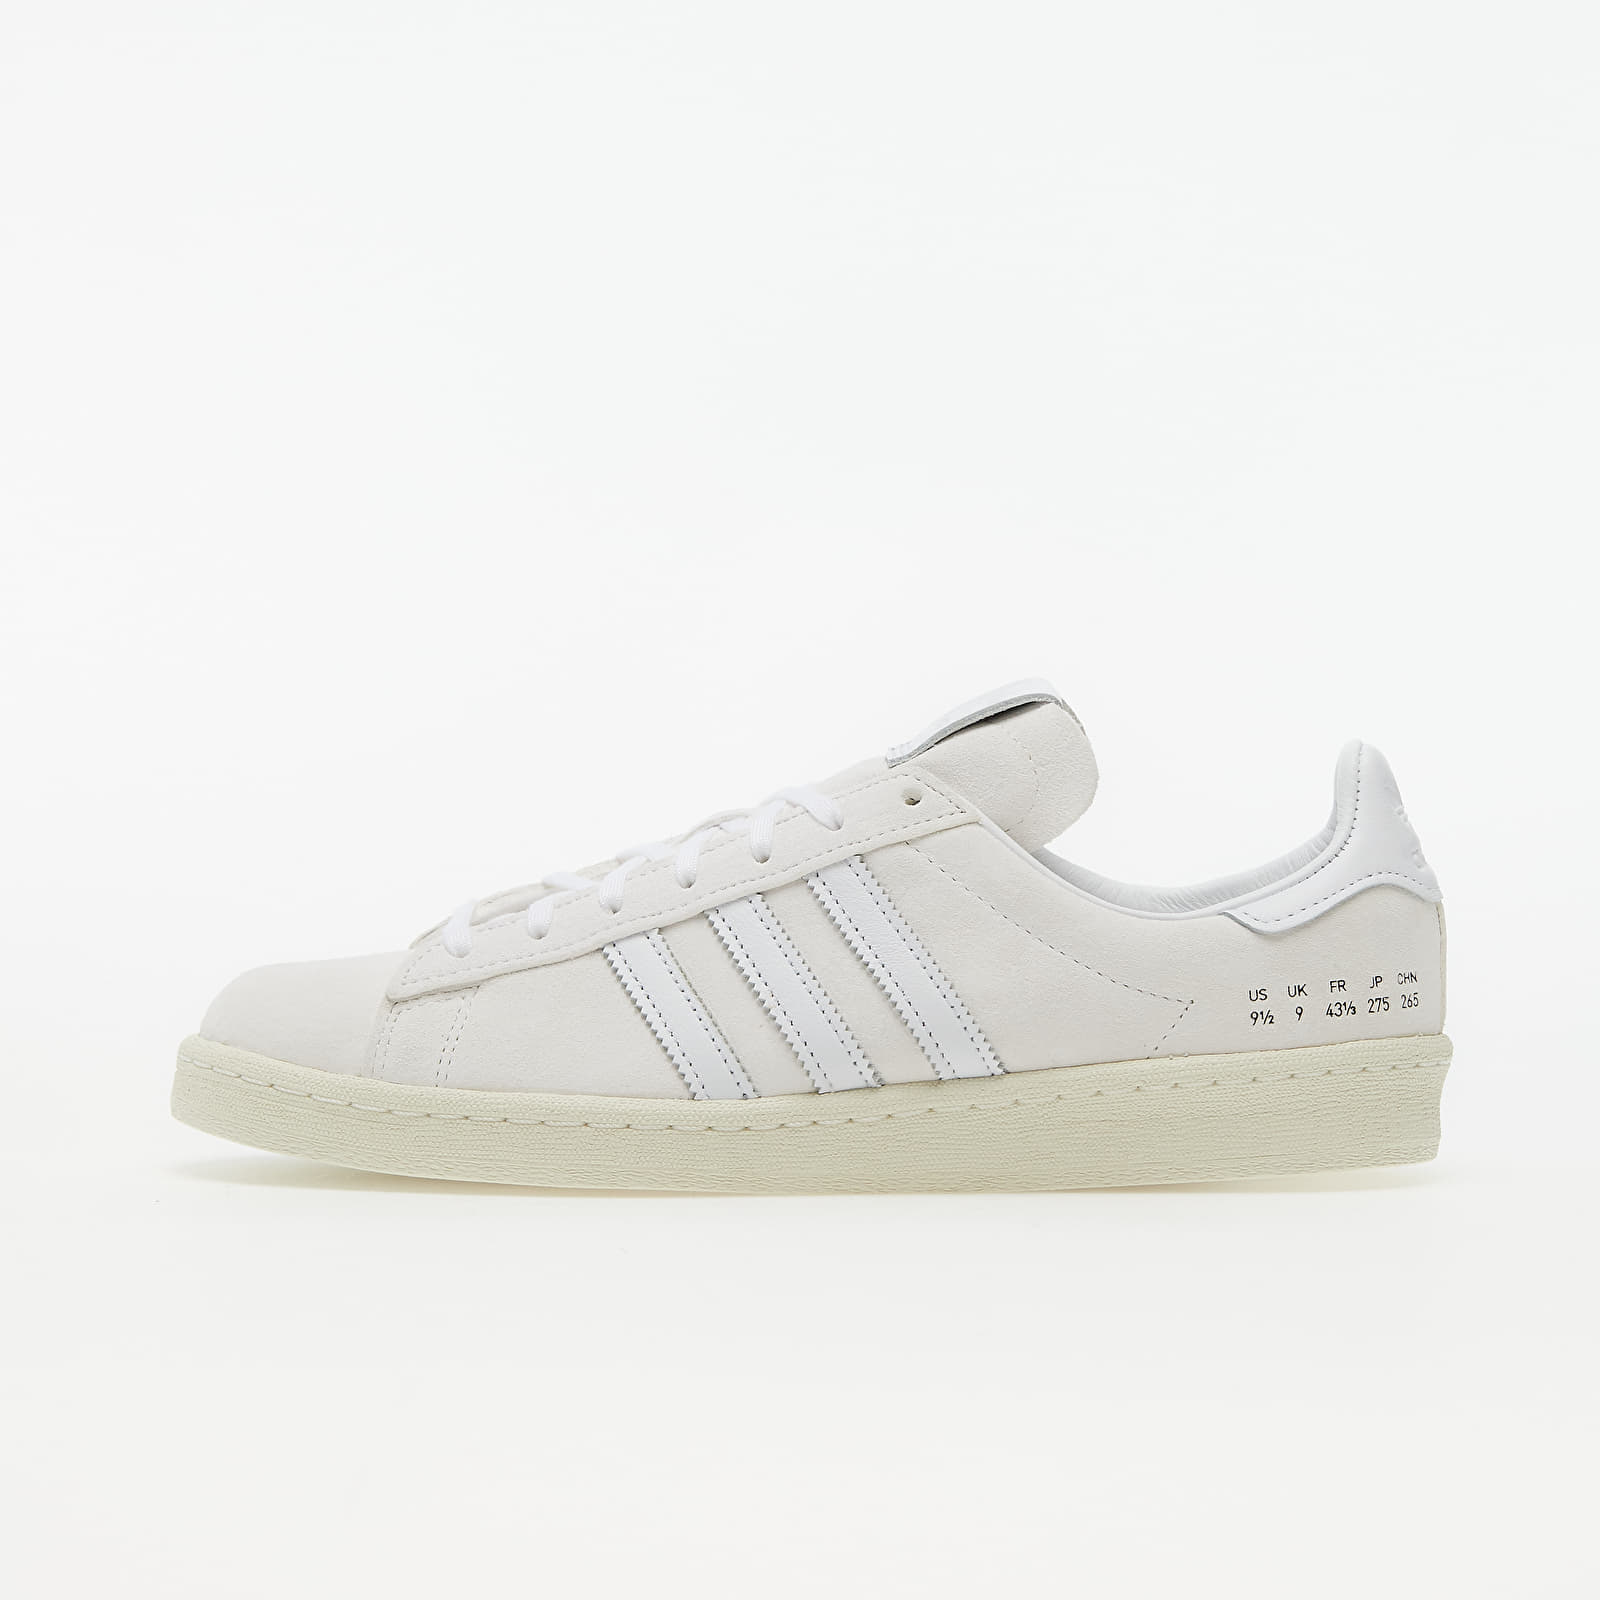 adidas Campus 80S Supplier Colour/ Ftwr White/ Off White FY5467